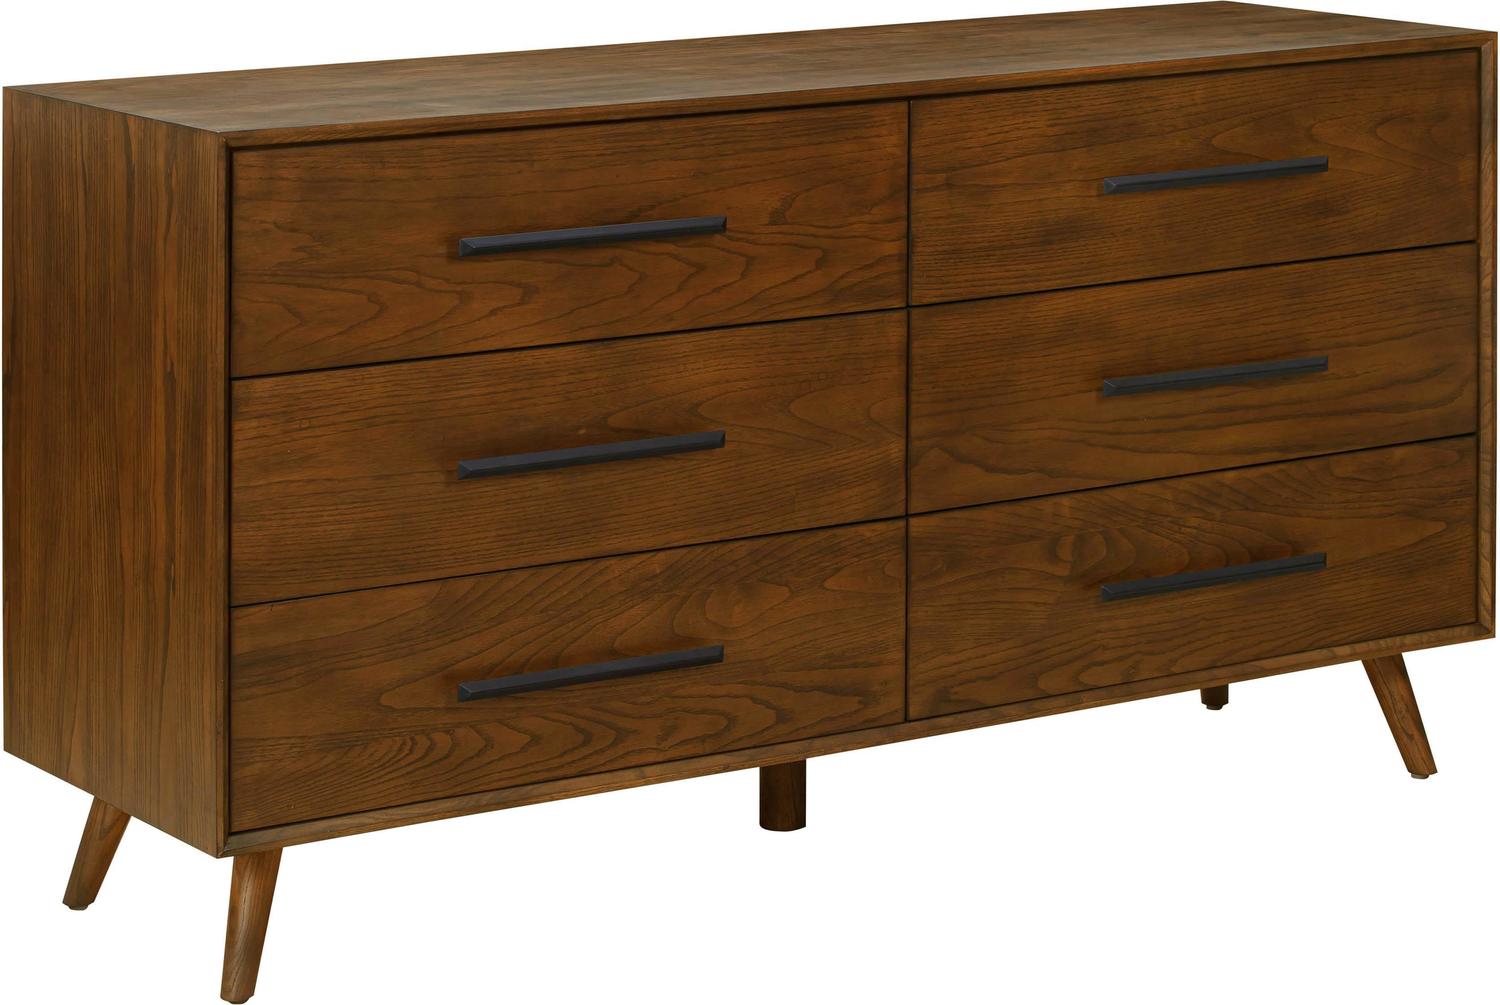 marble top chest Contemporary Design Furniture Dressers Walnut